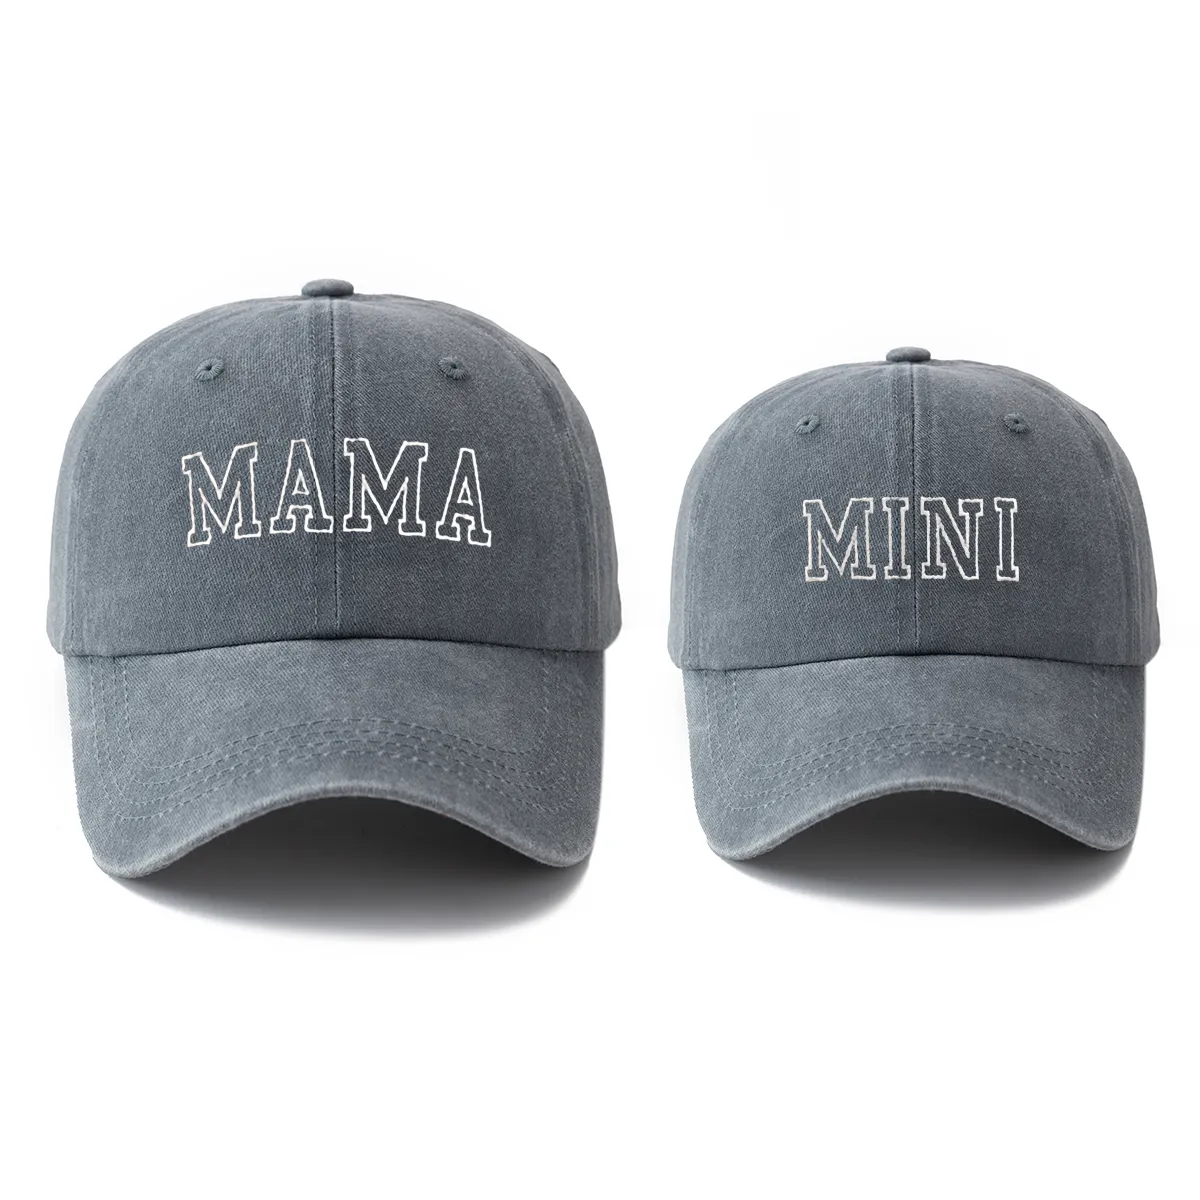 Family Matching Embroidered Washed Baseball Cap with Alphabet Design Grey big image 1